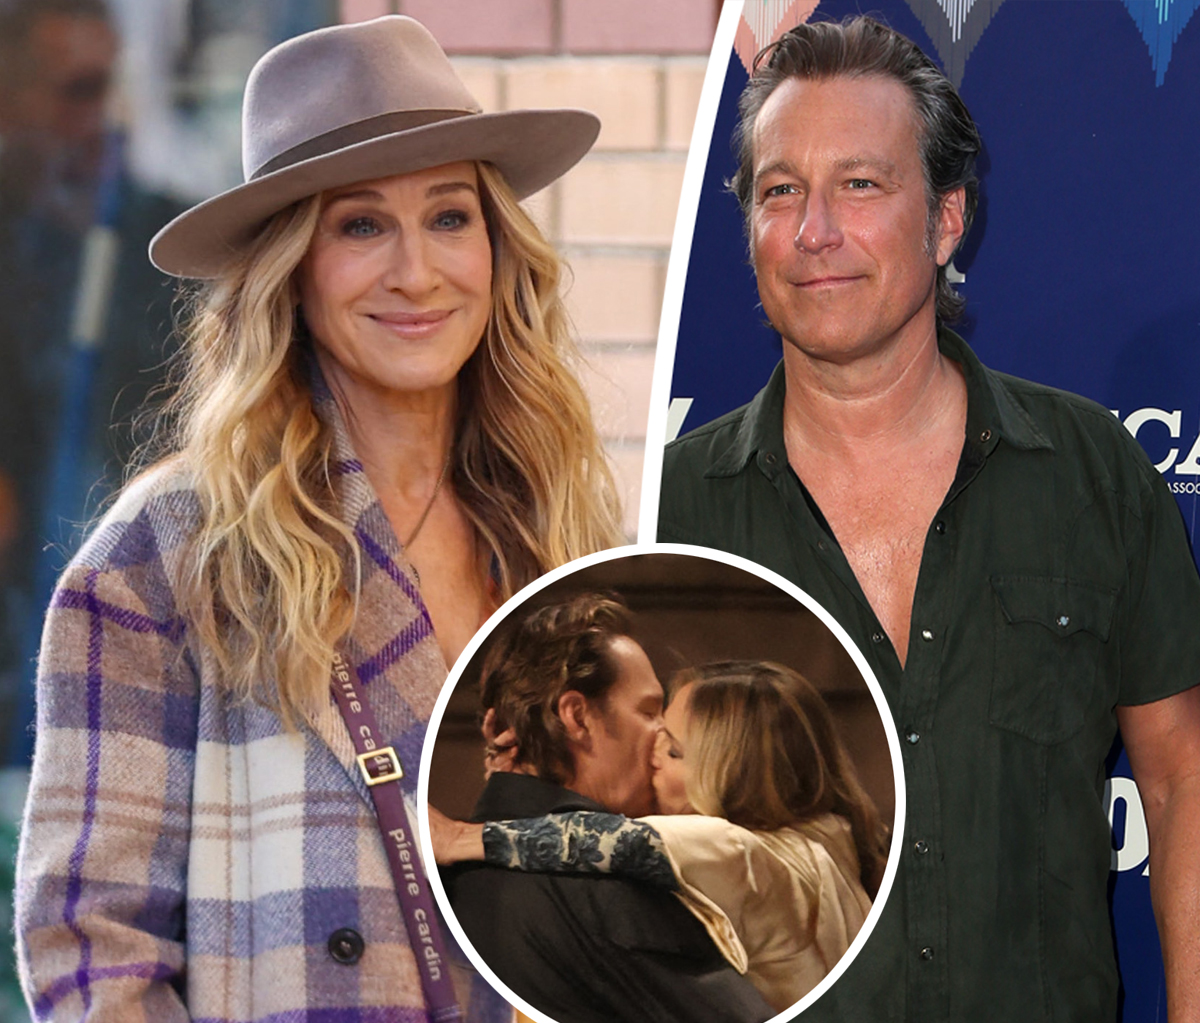 #Carrie & Aidan 4 Ever?? Sarah Jessica Parker & John Corbett Share Steamy Kiss While Filming And Just Like That!